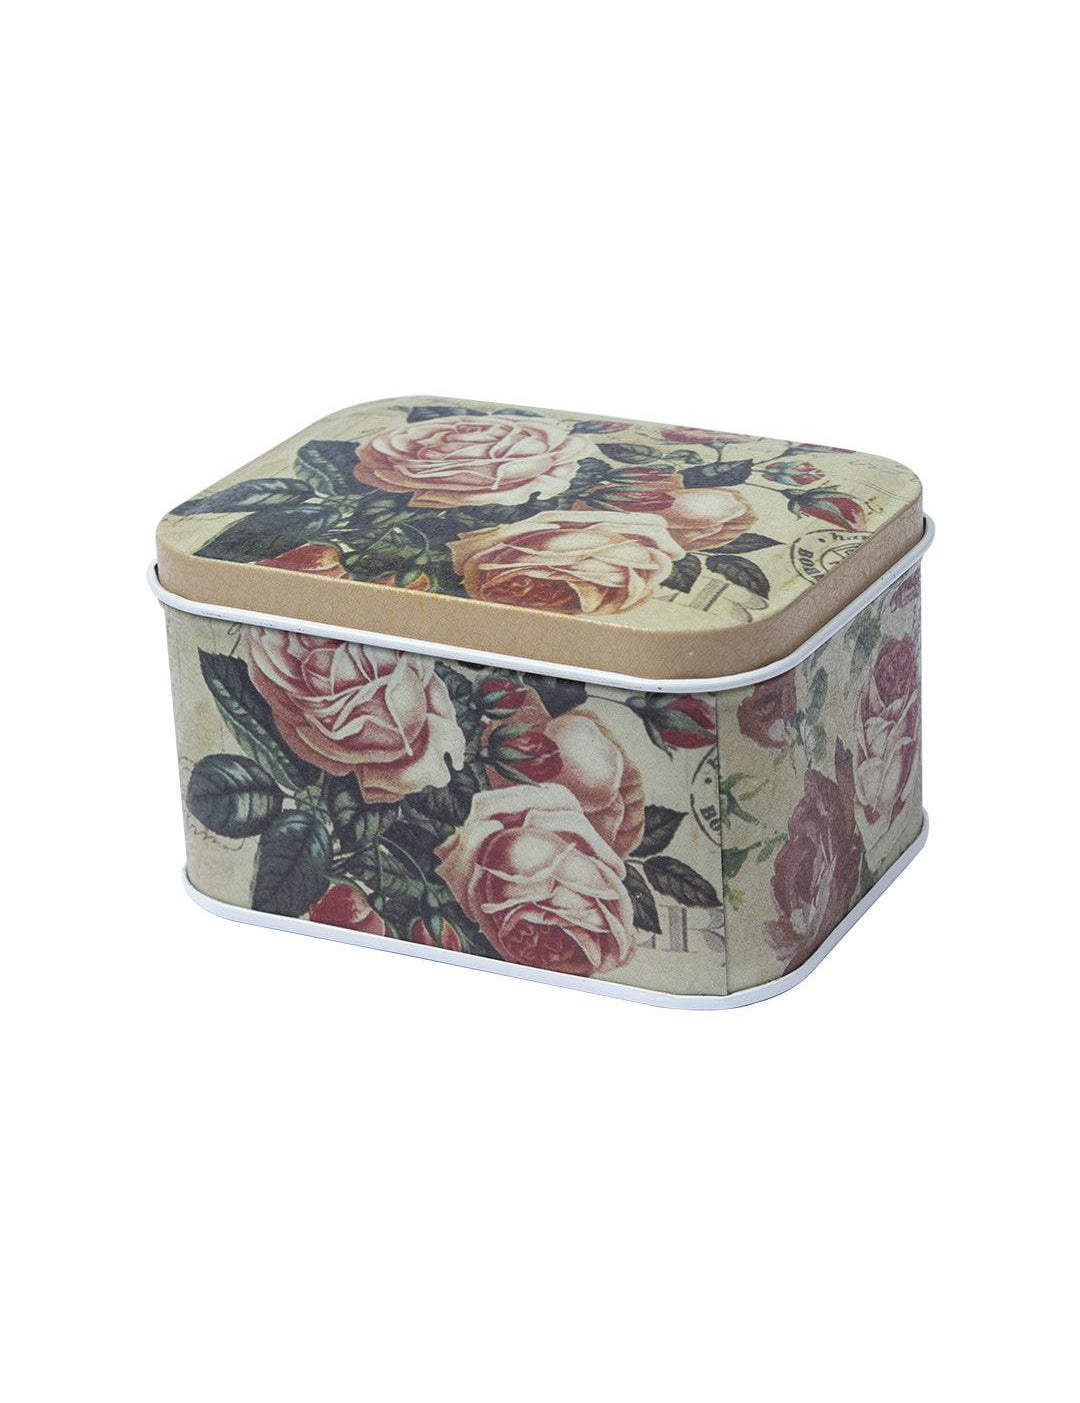 Floral Metal Tin Container Box - Multi Color - MARKET 99